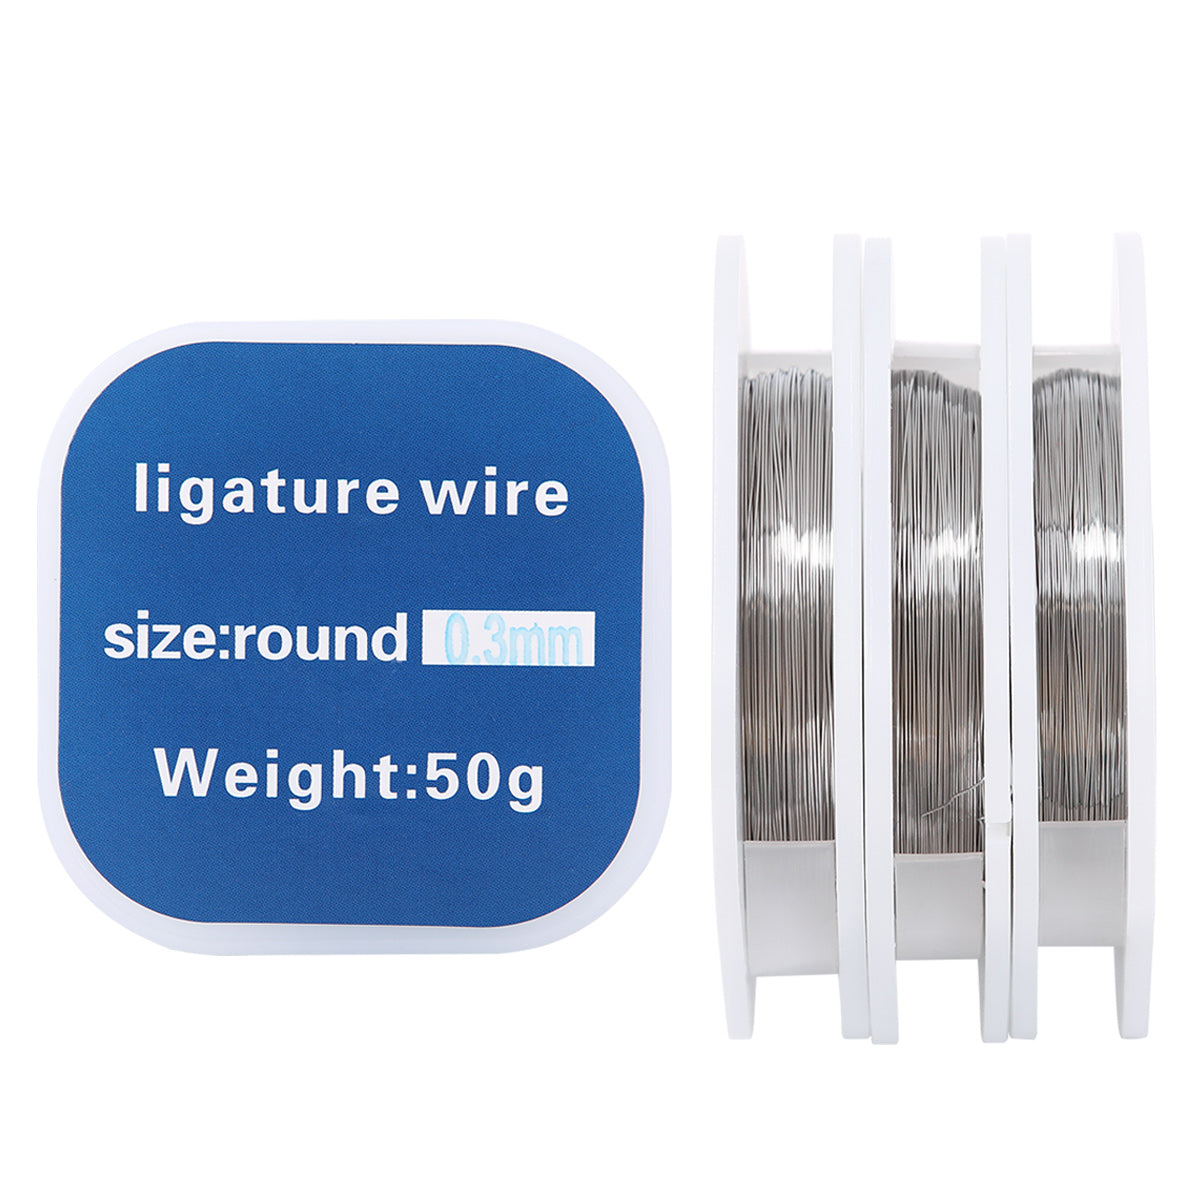 Orthodontic Ligature Wire Stainless Steel Round 0.2/ 0.25/ 0.3mm 50g/Roll - pairaydental.com